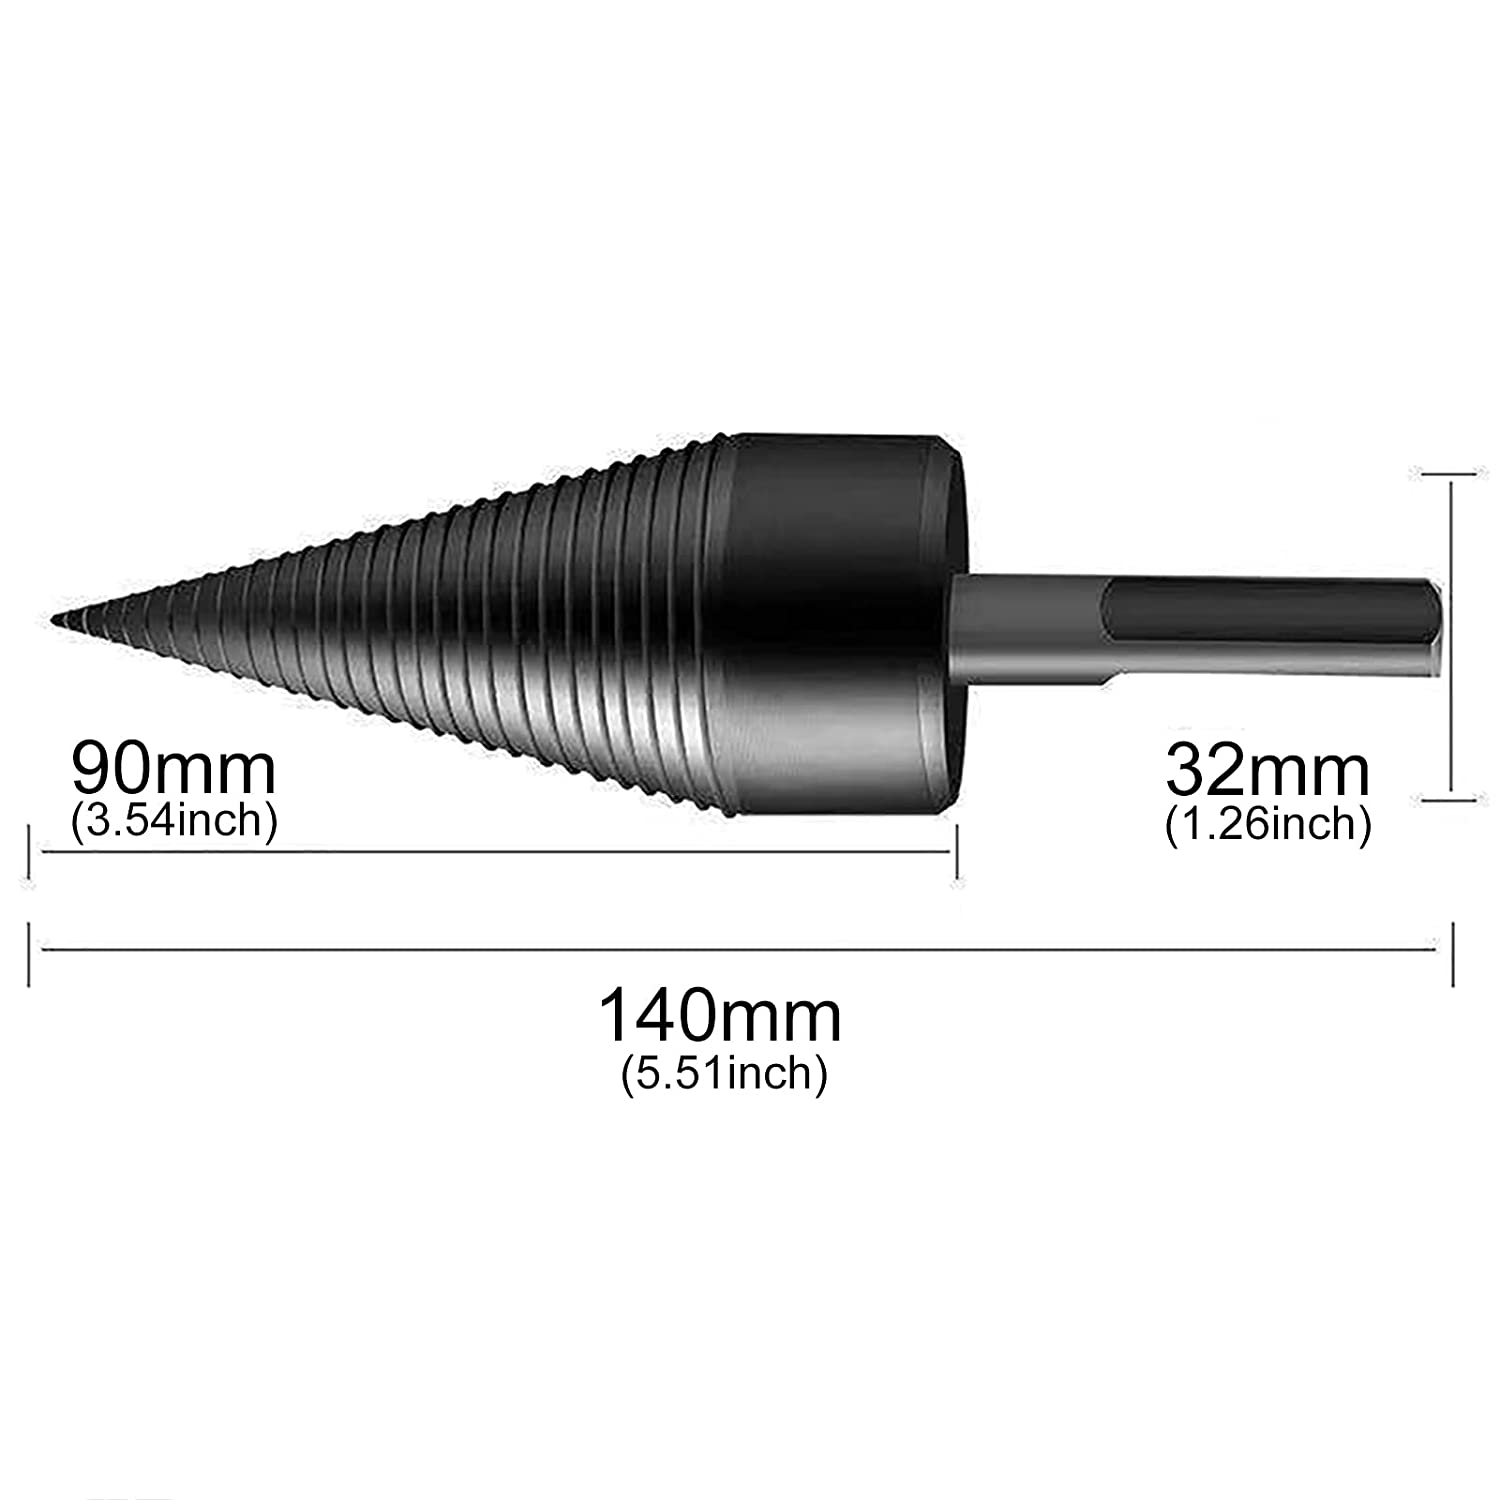 Fridja 3pcs Removable Firewood Log Splitter Drill Bit, Wood Splitter Drill Bits,Heavy Duty Drill Screw Cone Driver for Hand Drill Stick-hex+Square+Round (32mm) - image 4 of 7